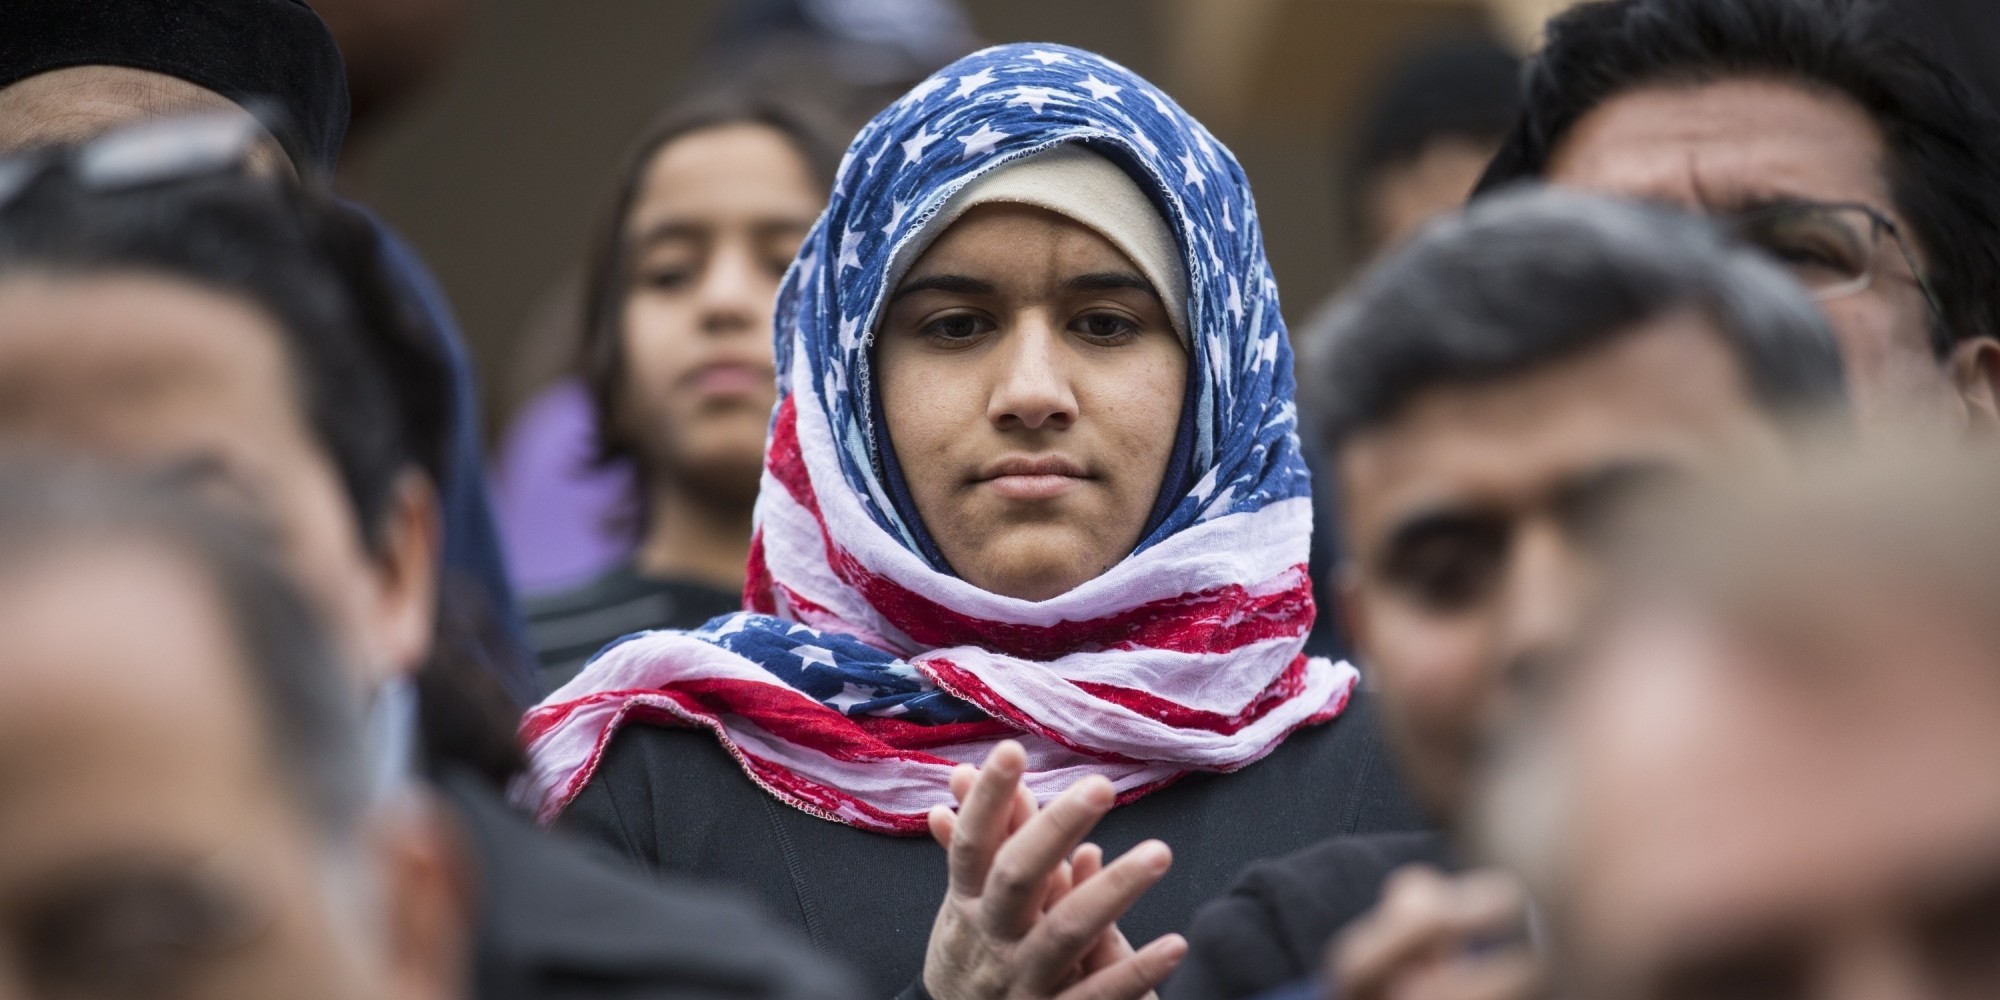 Muslim Americans Are More Likely to Reject Violence, Intolerance Than